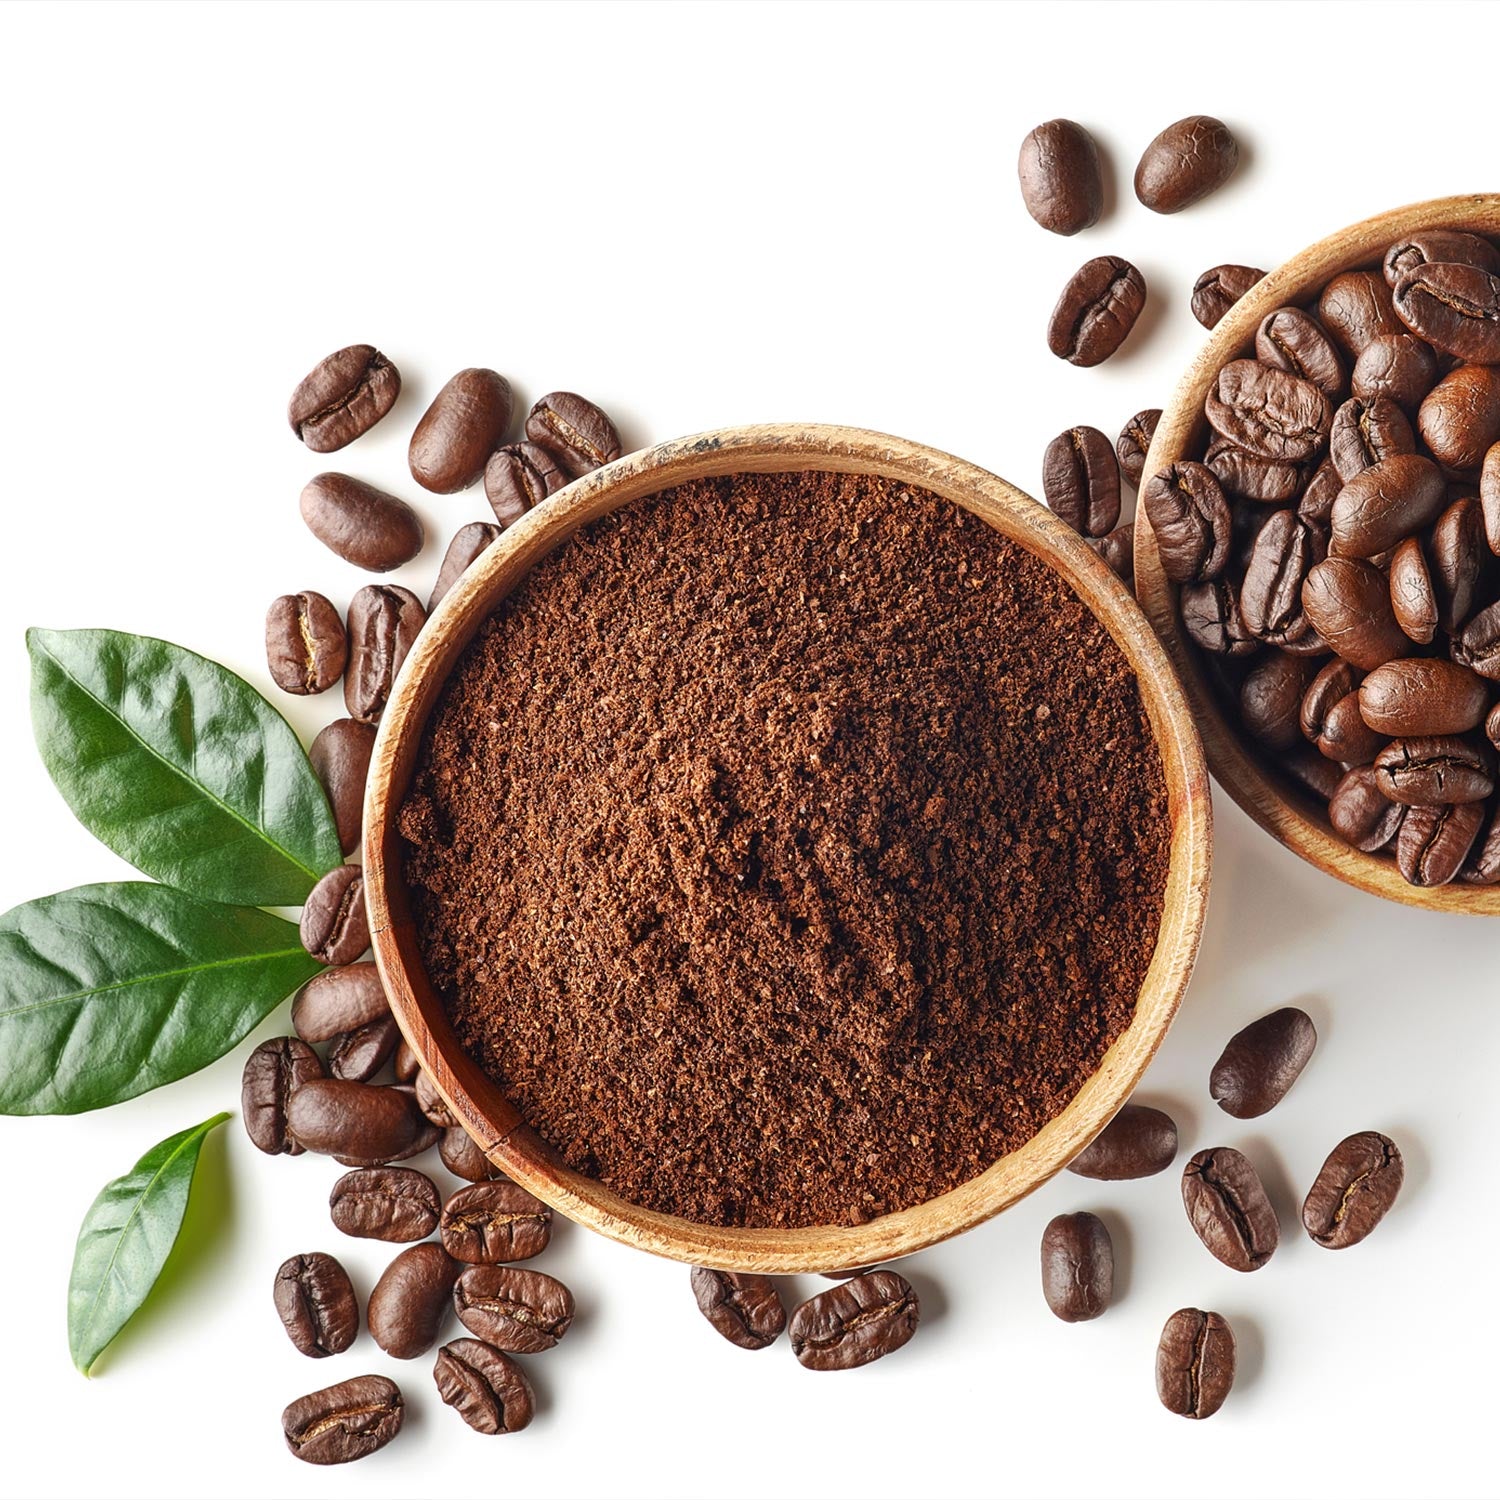 What is Ethically Sourced Coffee & Why is it Important?